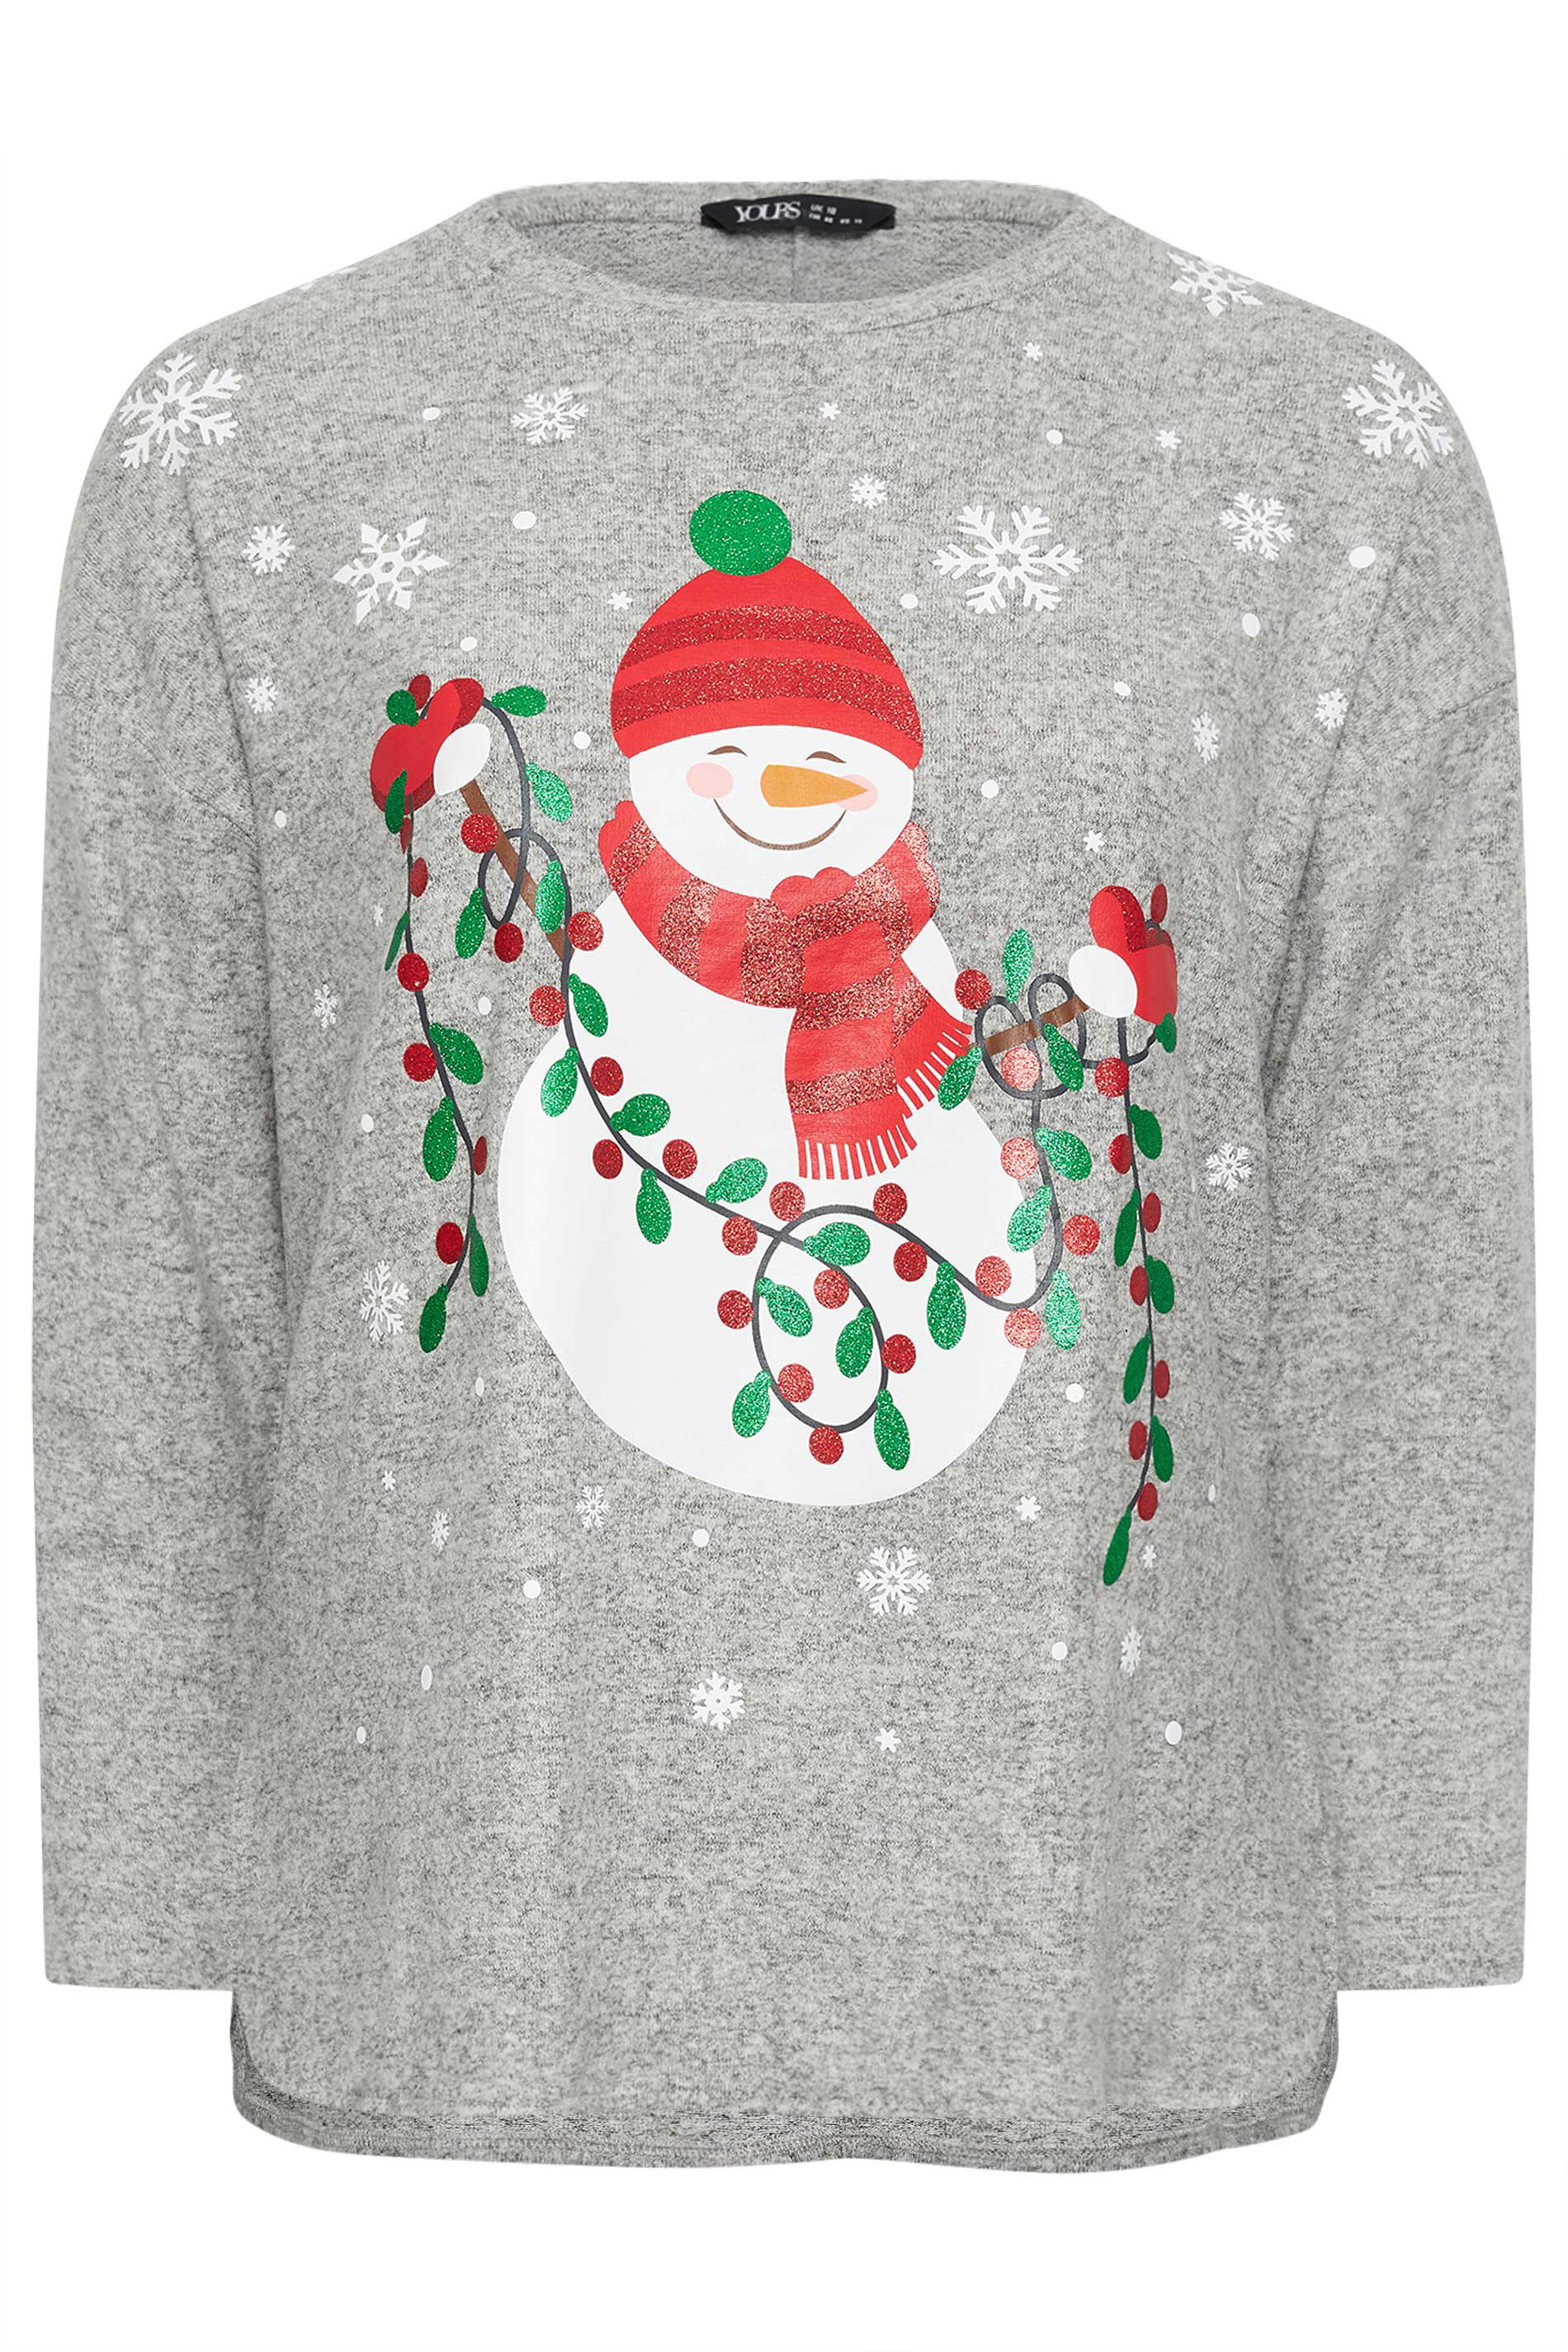 YOURS Plus Size Grey Snowman Print Soft Touch Christmas Jumper